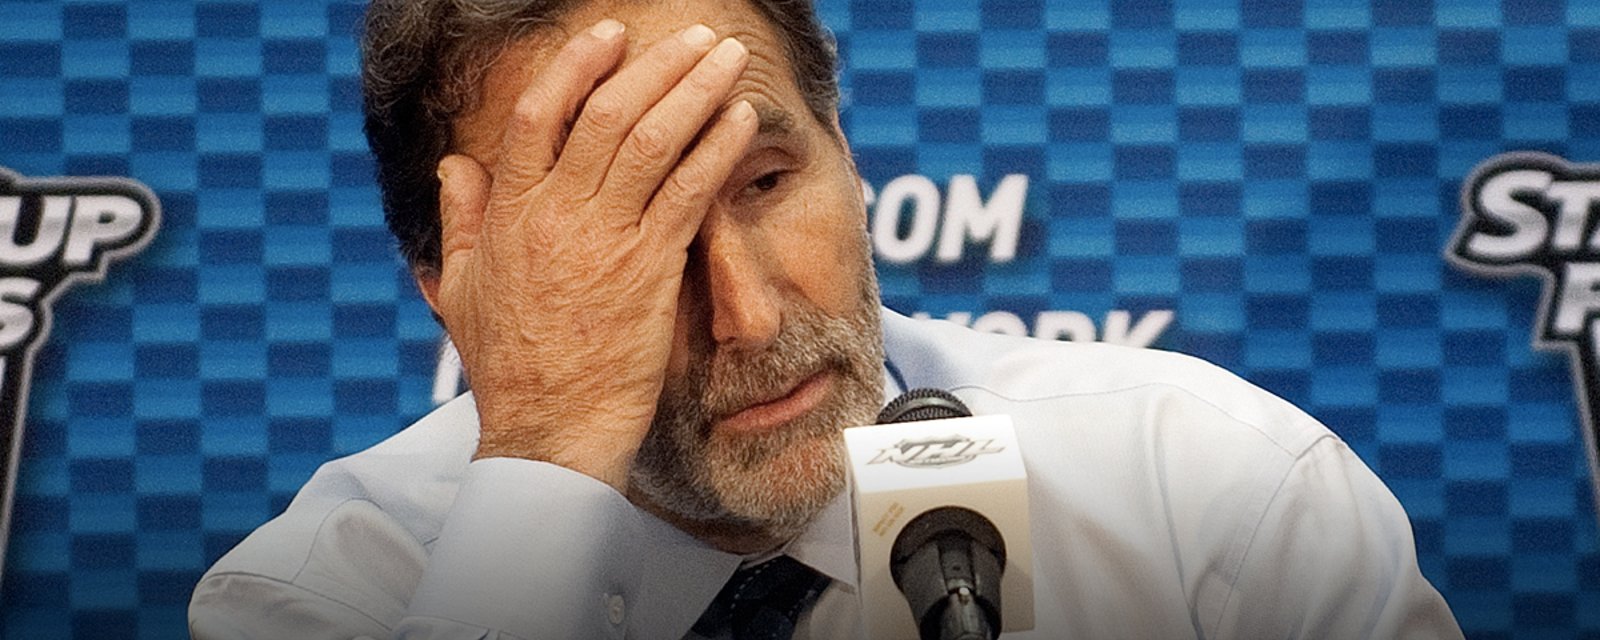 Tortorella calls one of his young players “stupid” multiple times!